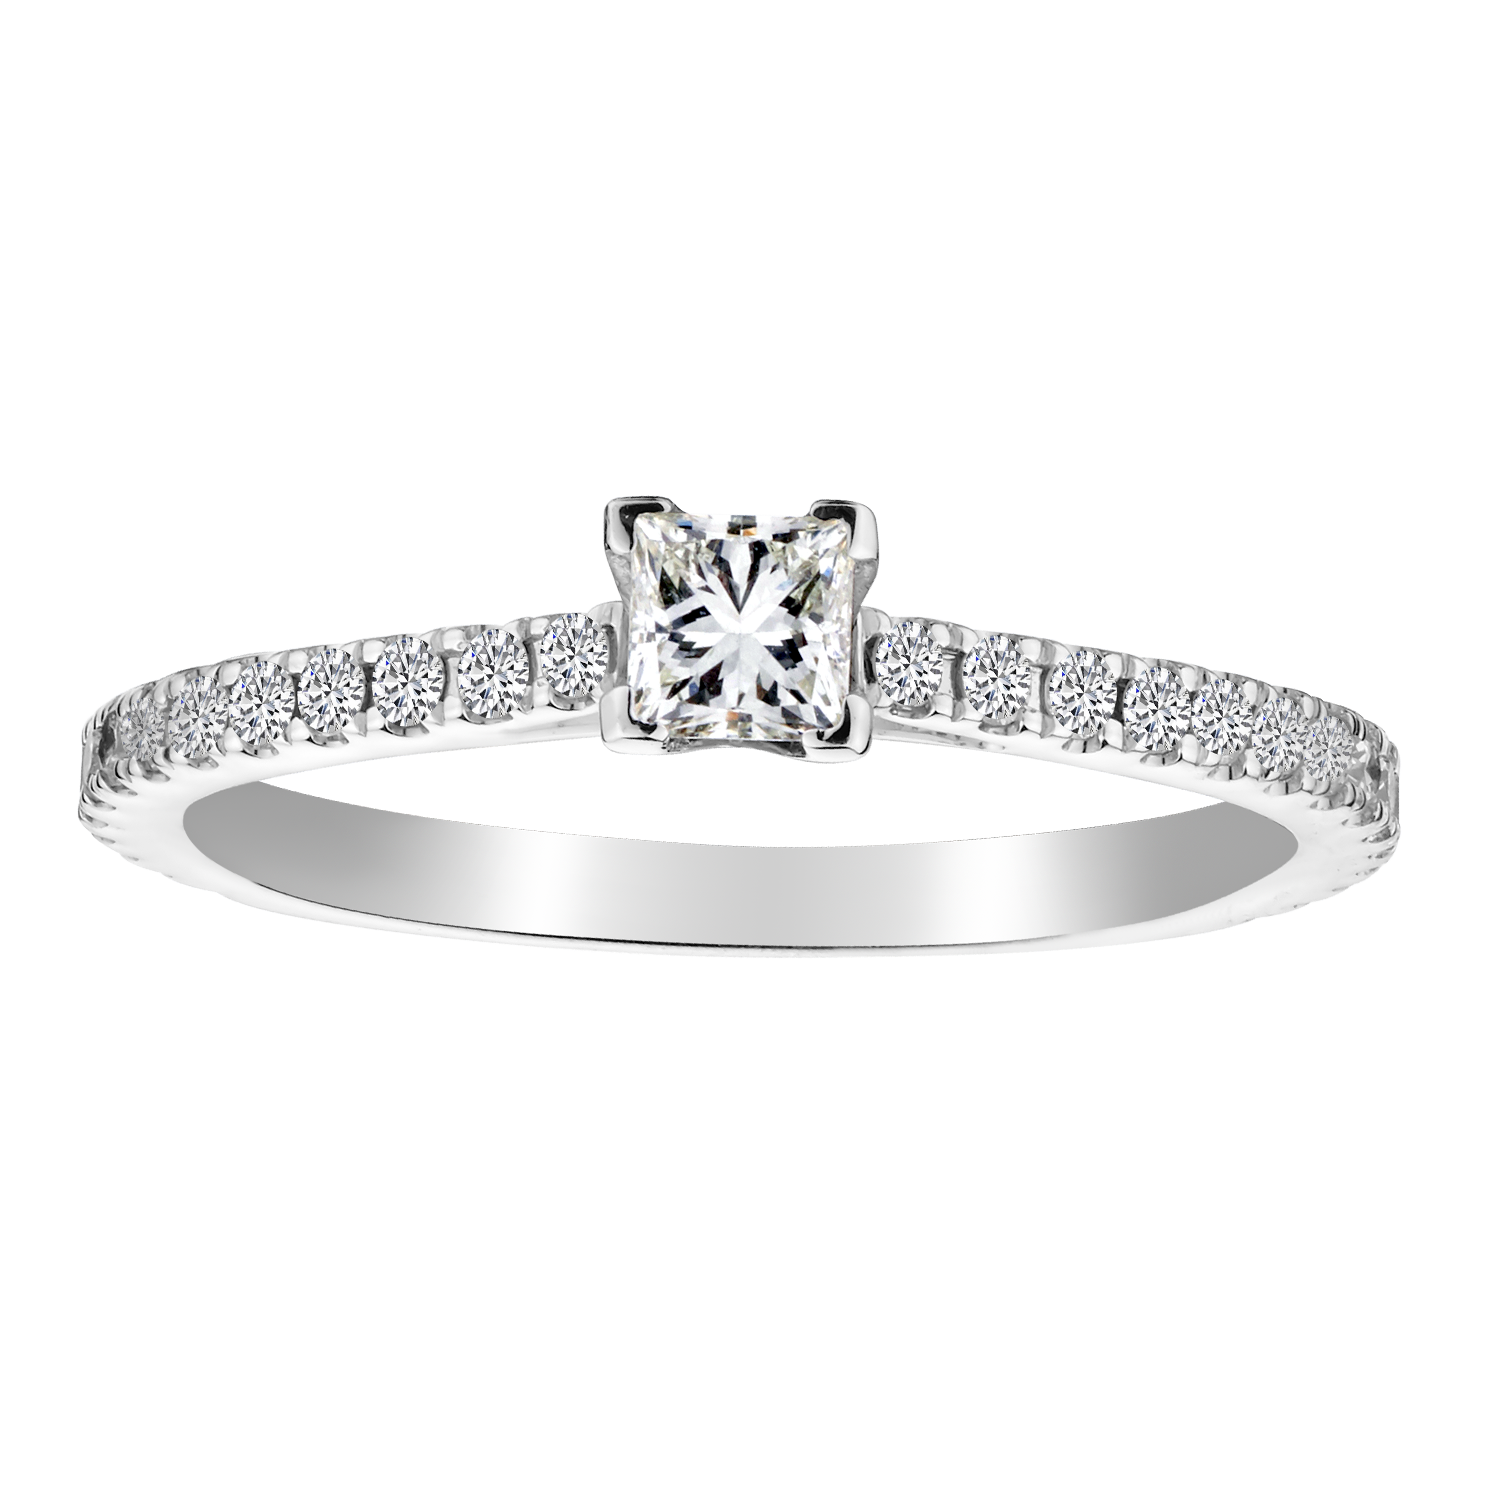 .50 Carat Canadian Princess Diamond Engagement Ring,  14kt White Gold. Griffin Jewellery Designs